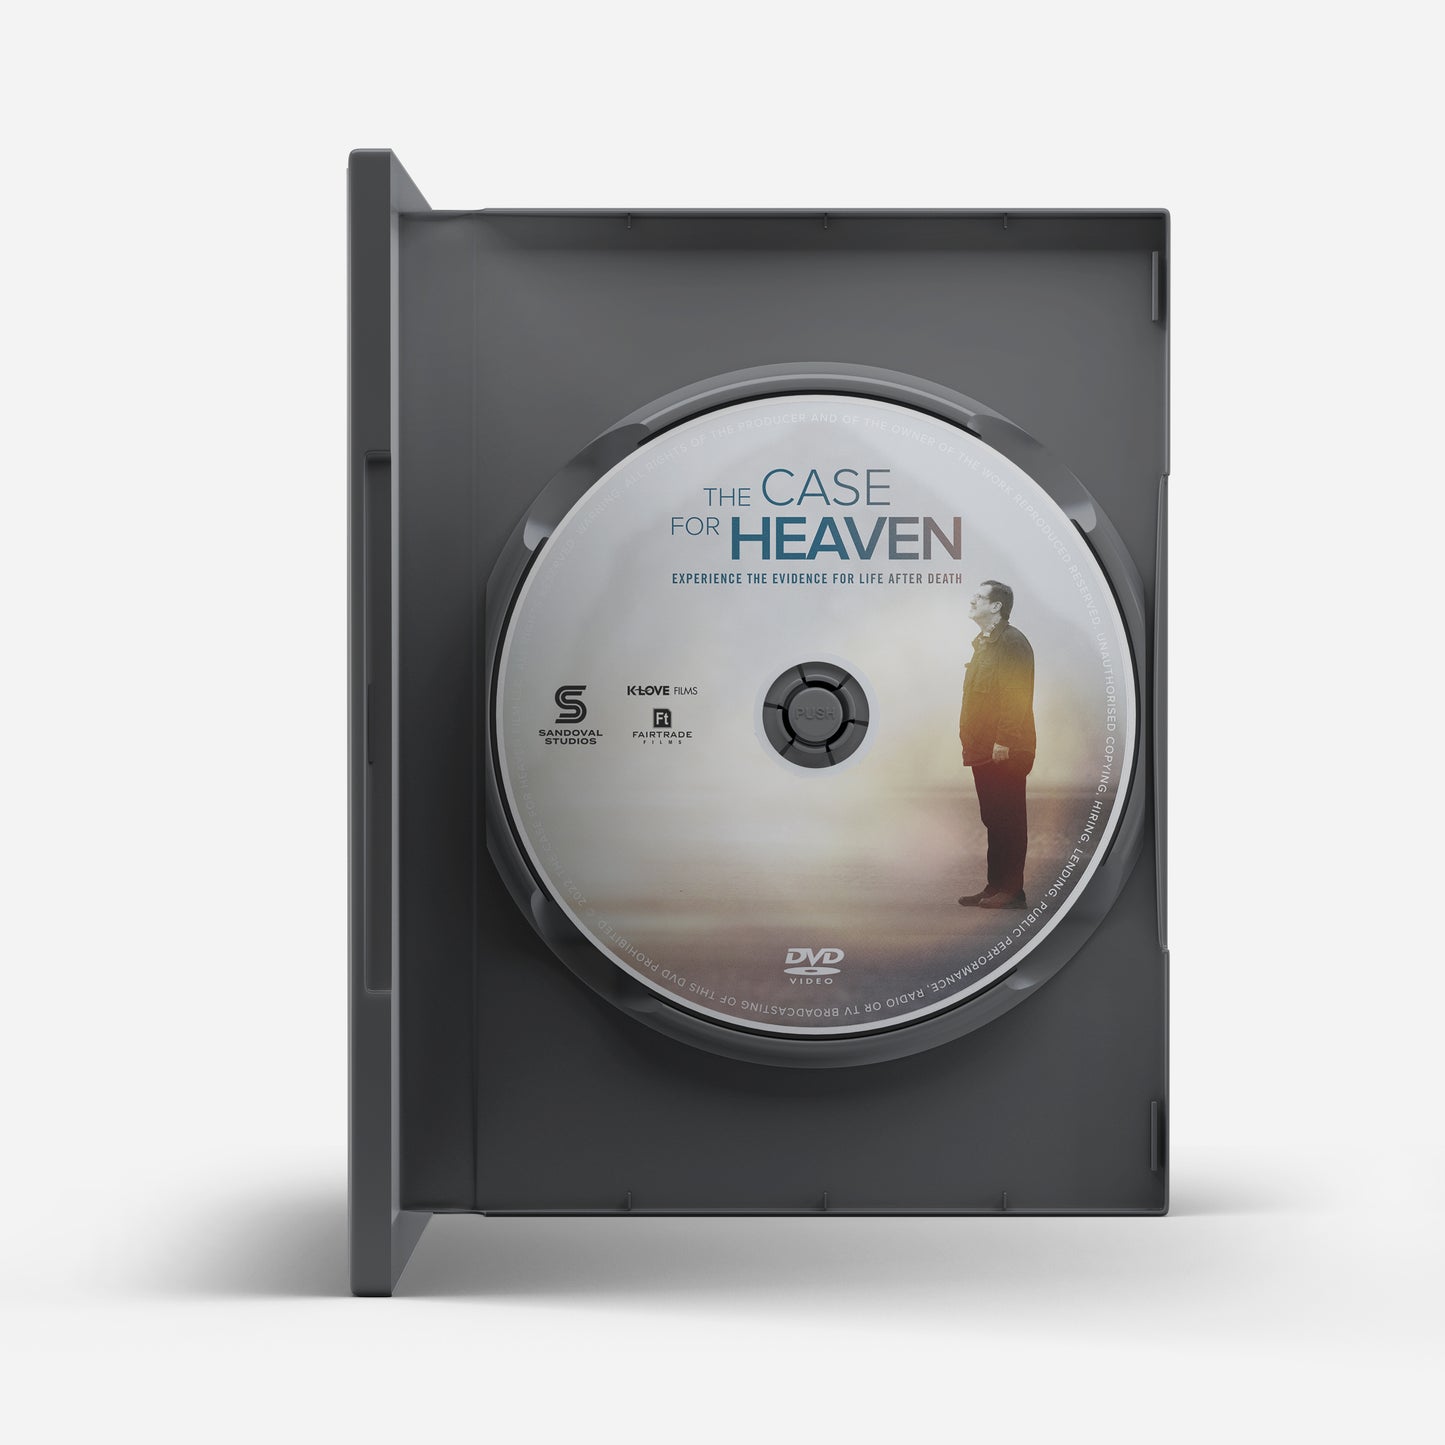 THE CASE FOR HEAVEN DVD